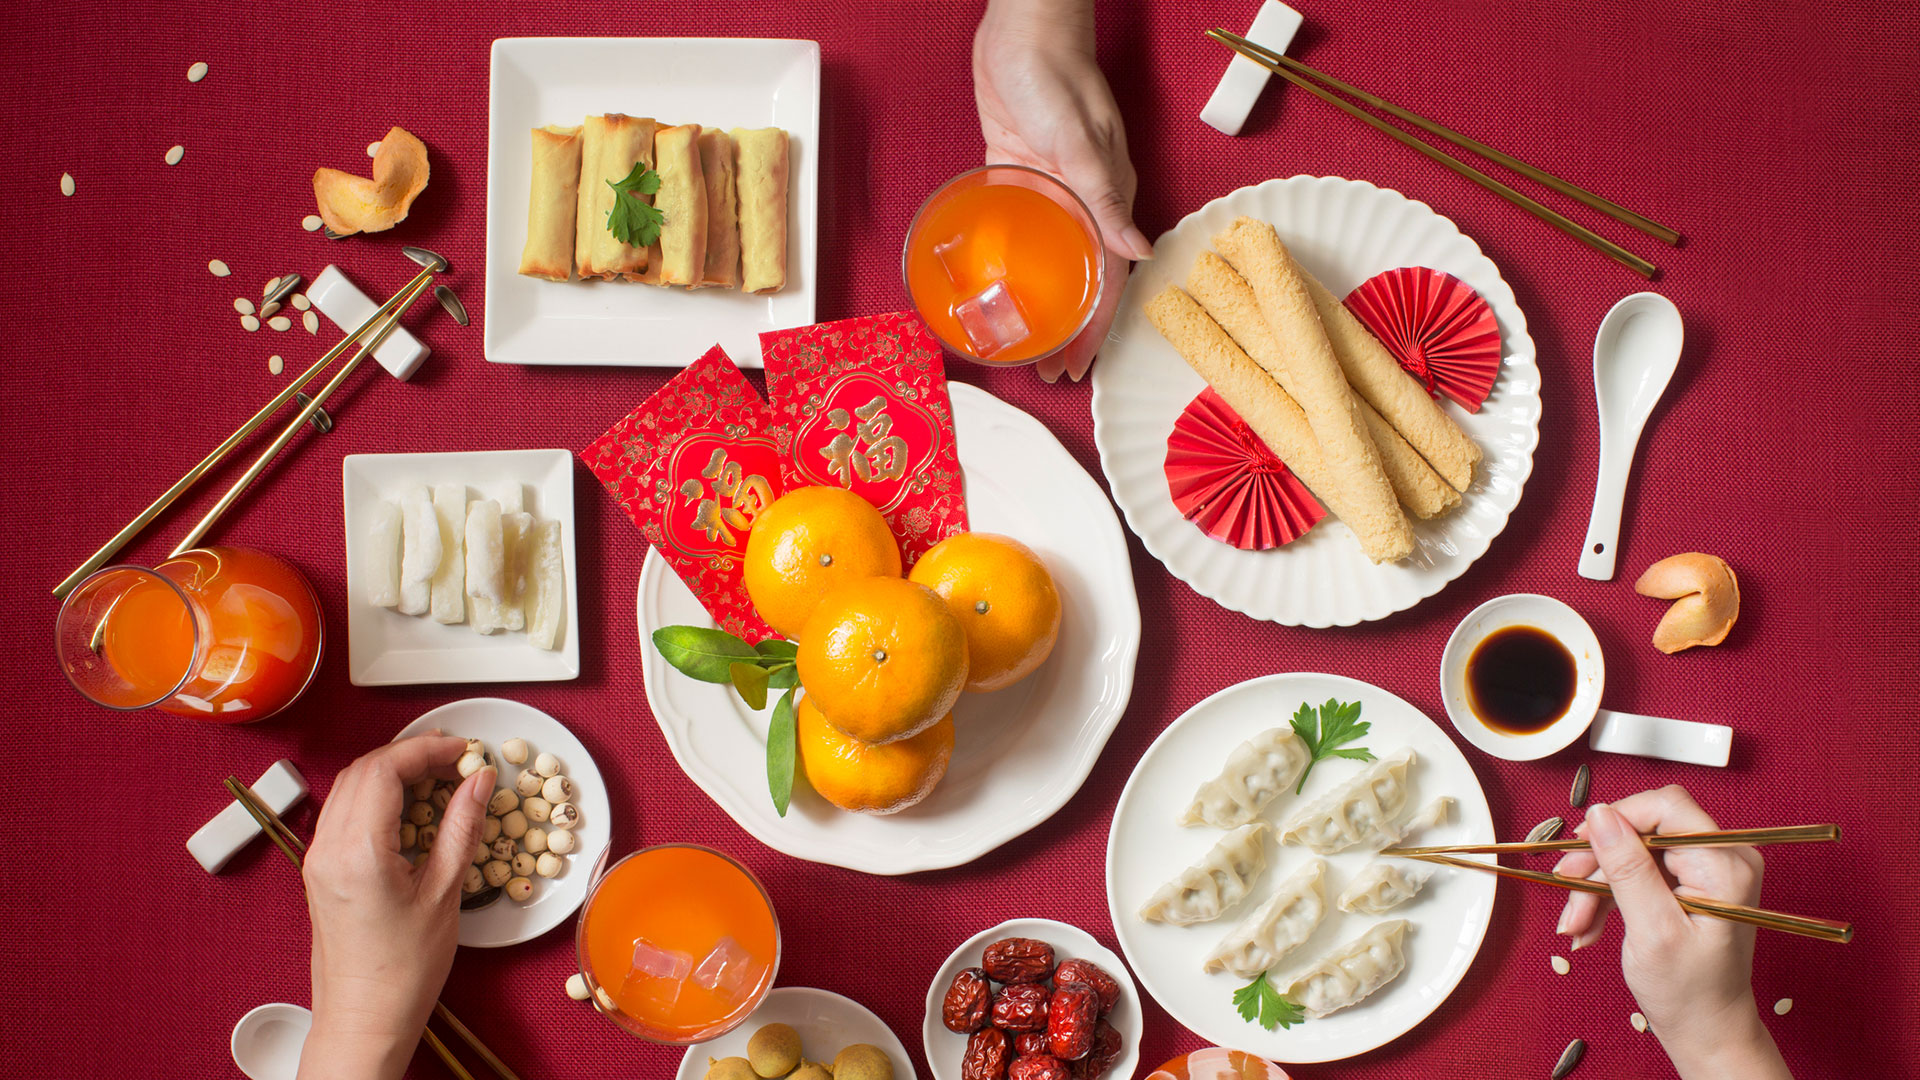 enjoy-blessings-chinese-new-year-with-lucky-eats-1920x1080-1674268653902123665633-1674460528465-16744605286641355216298.jpg